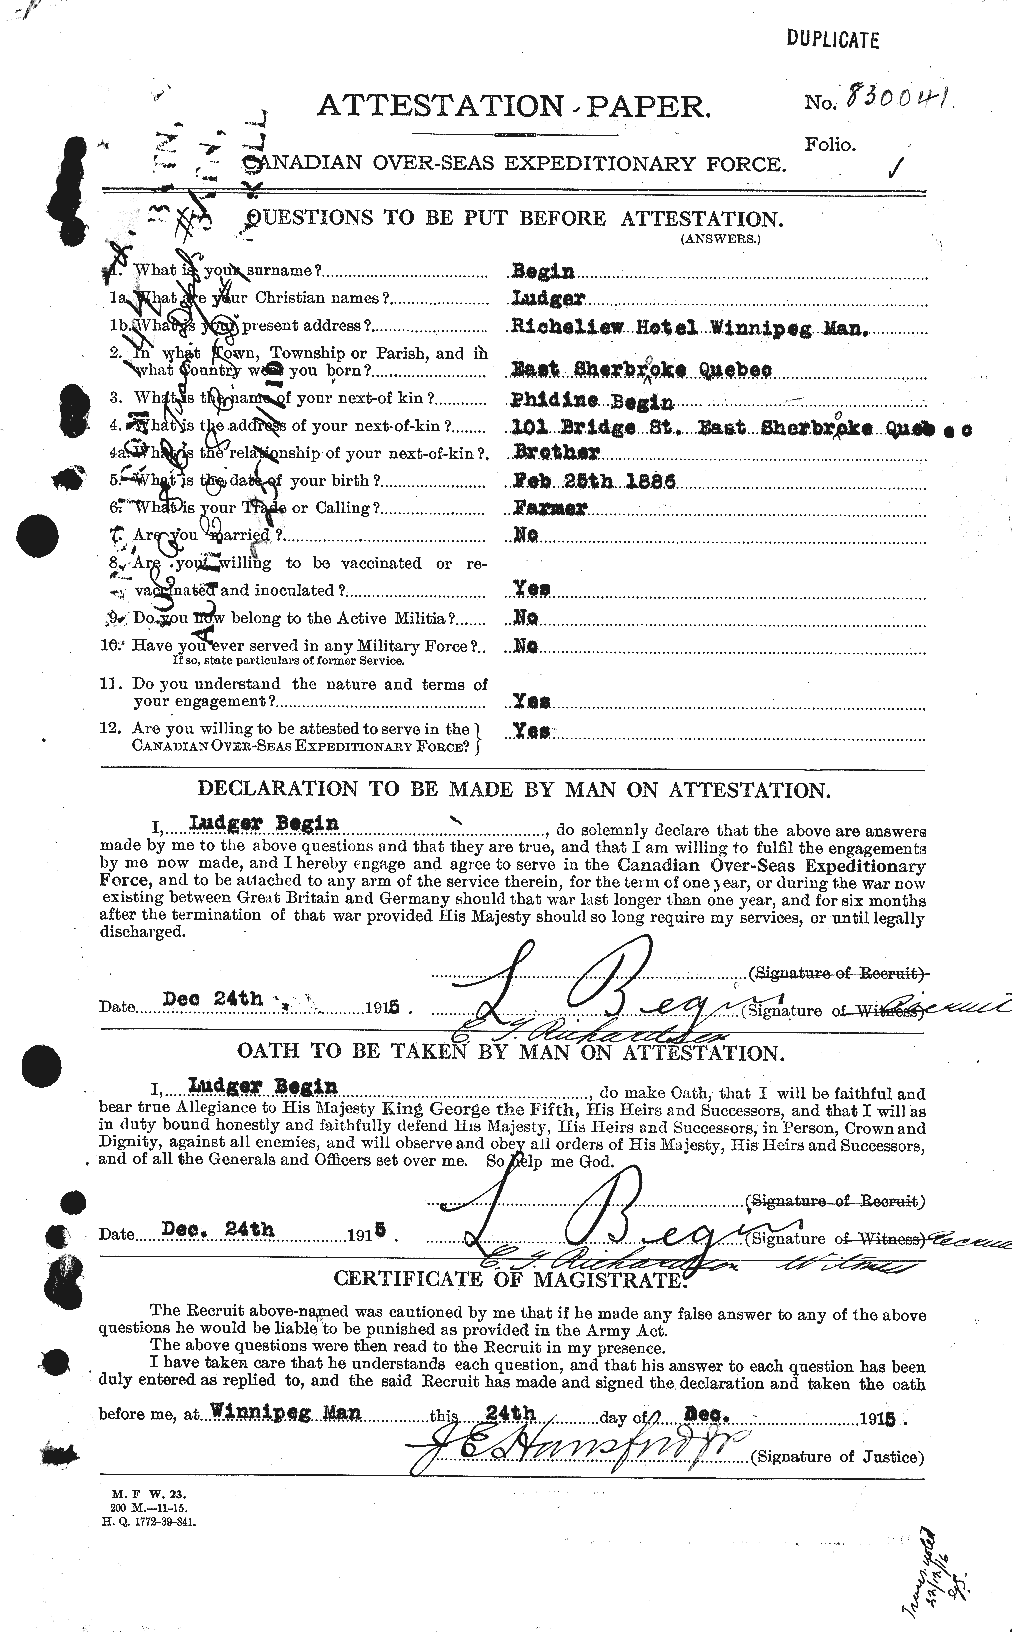 Personnel Records of the First World War - CEF 228630a